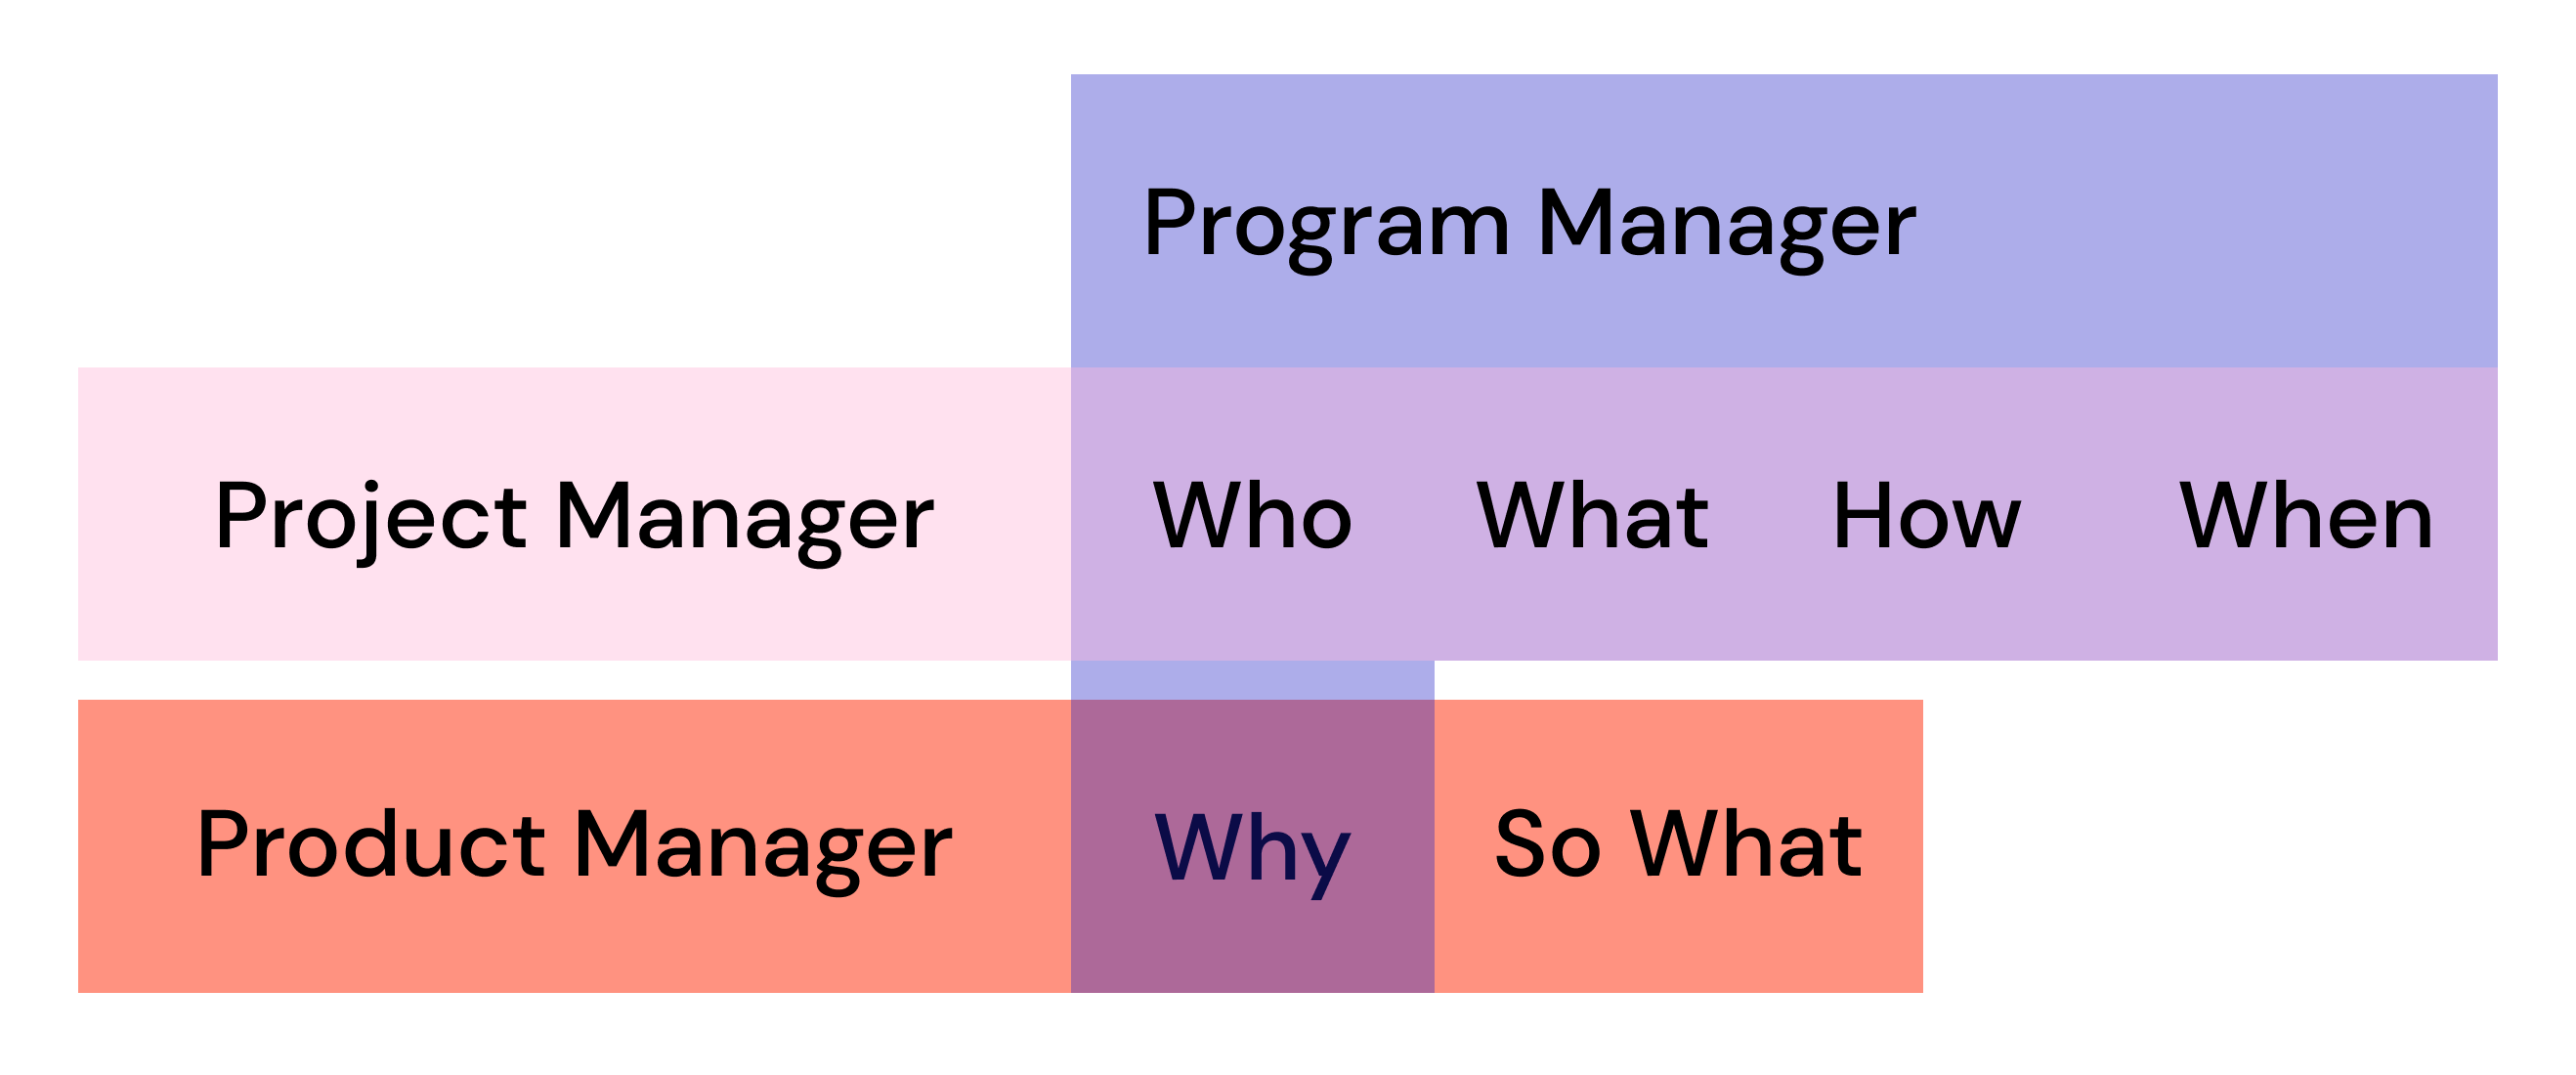 A Venn Diagram showing the overlap between program, project, and product manager questions.